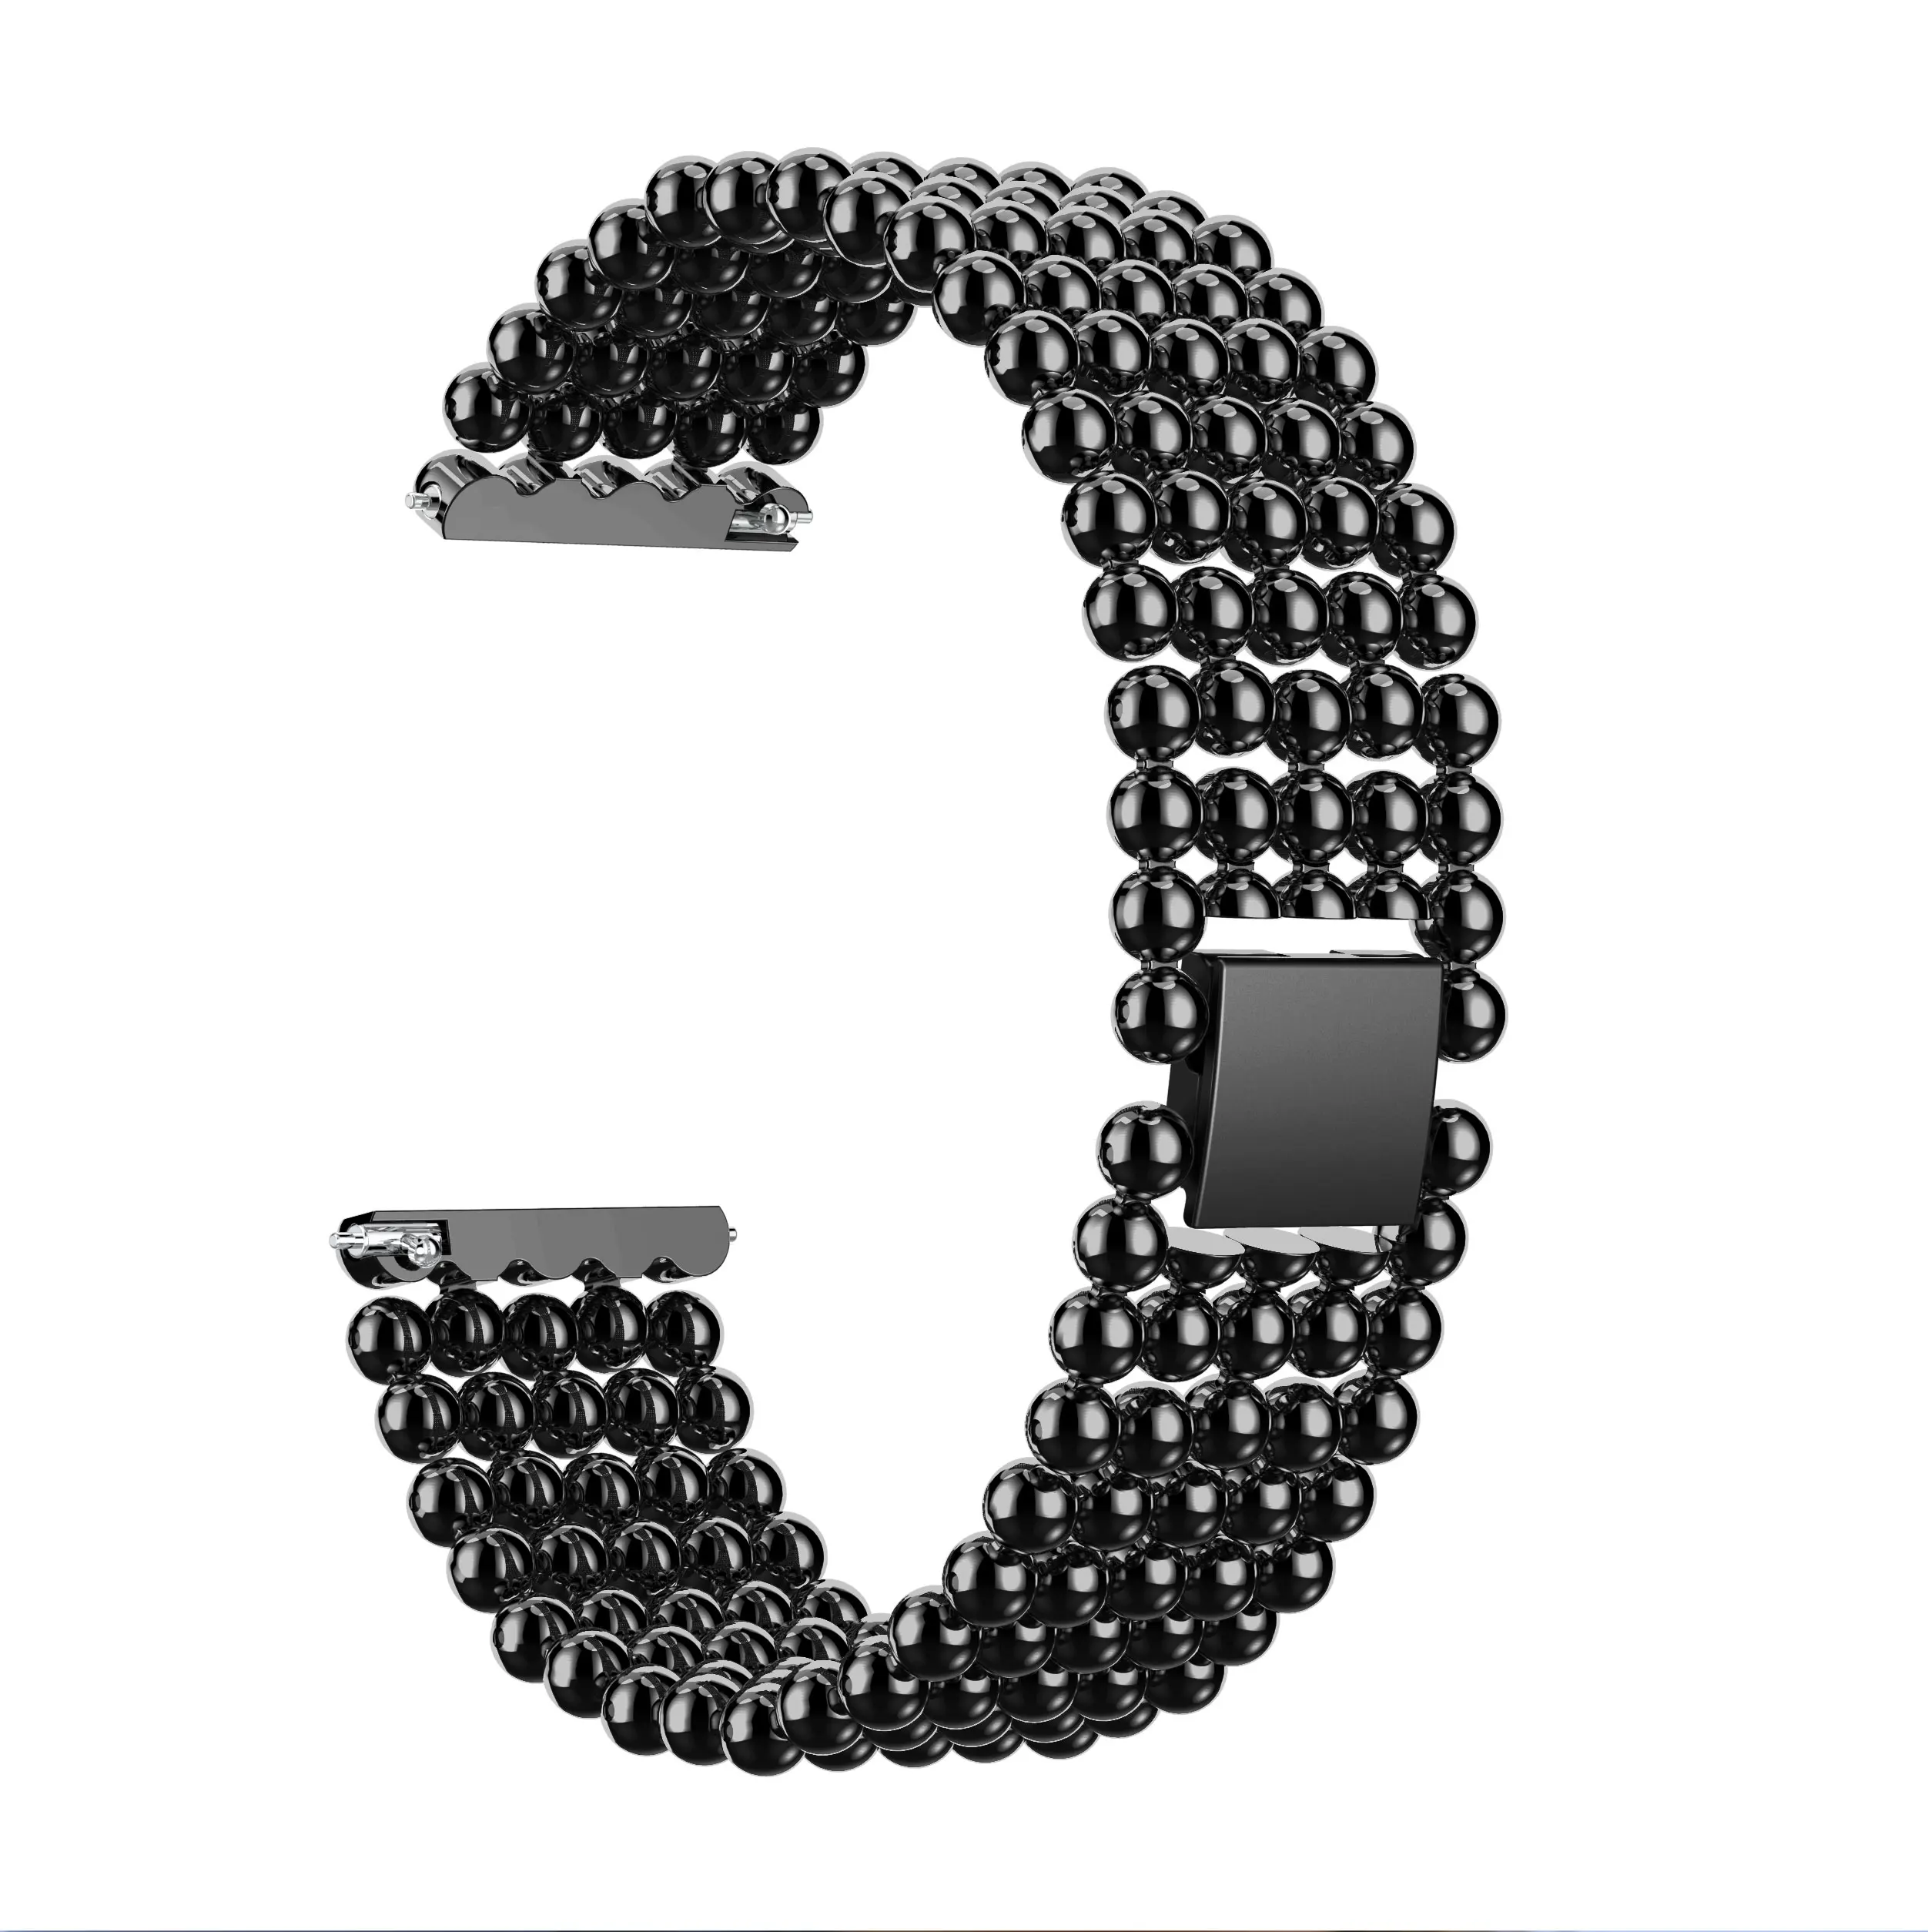 Yayuu Fashion Five Beads Round Alloy WatchBand Wrist Strap Replacement Smart watch Bands Accessories For Fitbit Blzae/Versa 1/2 - Цвет: Black